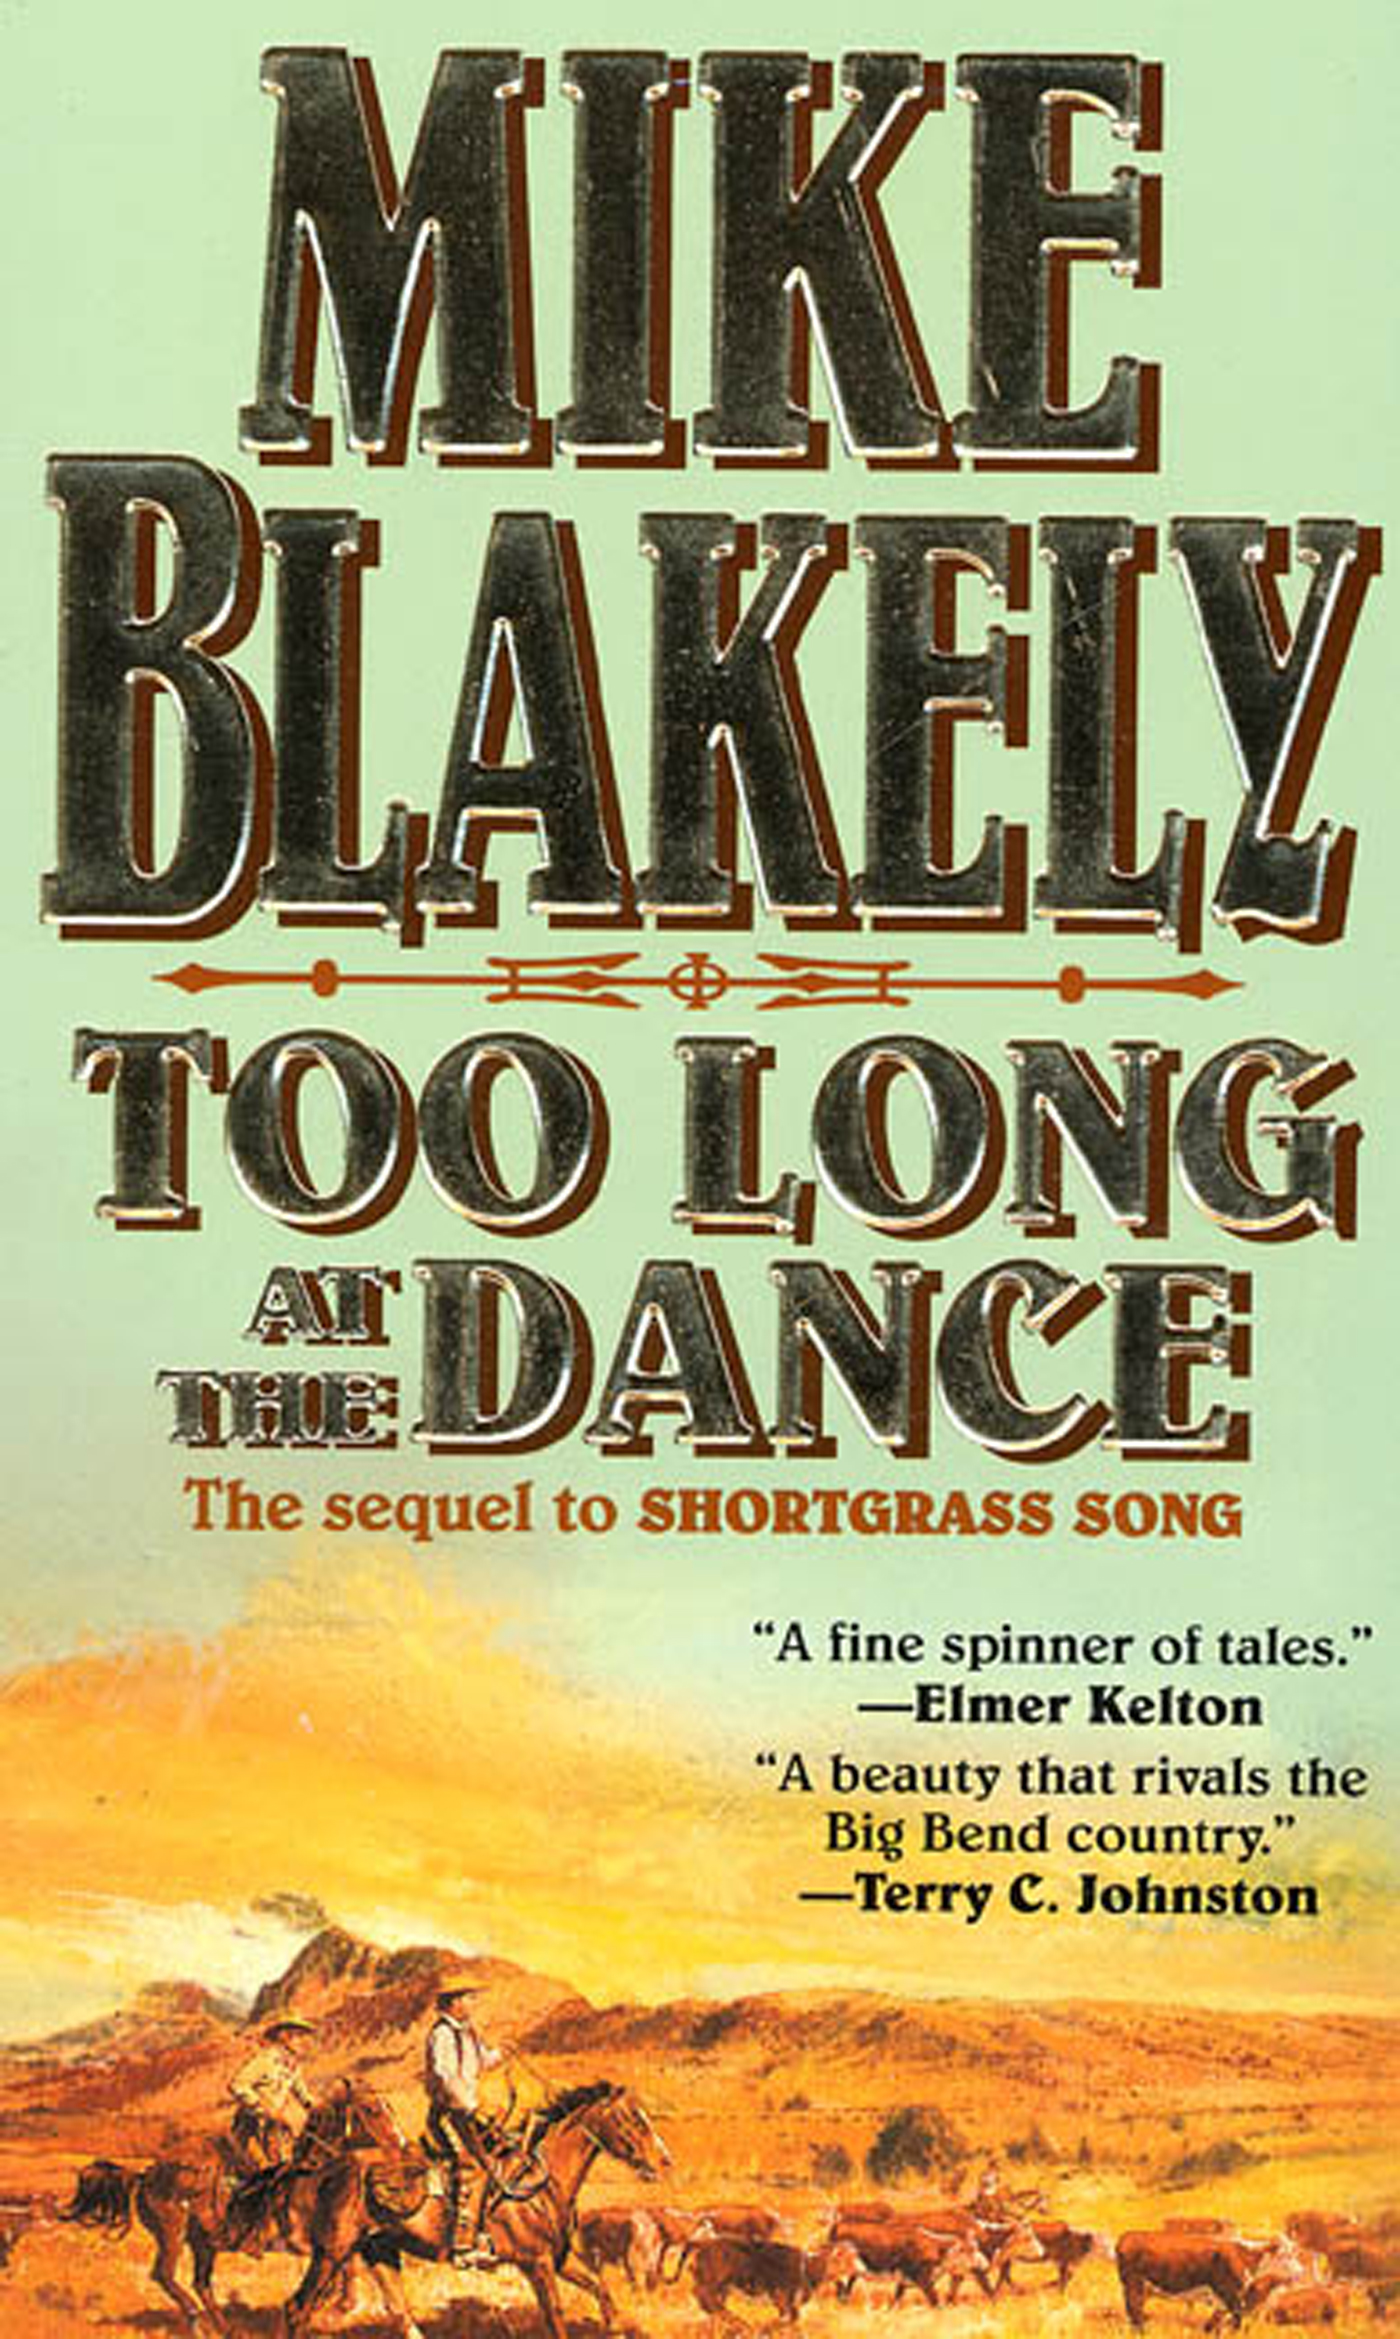 Too Long at the Dance : The sequel to 'Shortgrass Song' by Mike Blakely